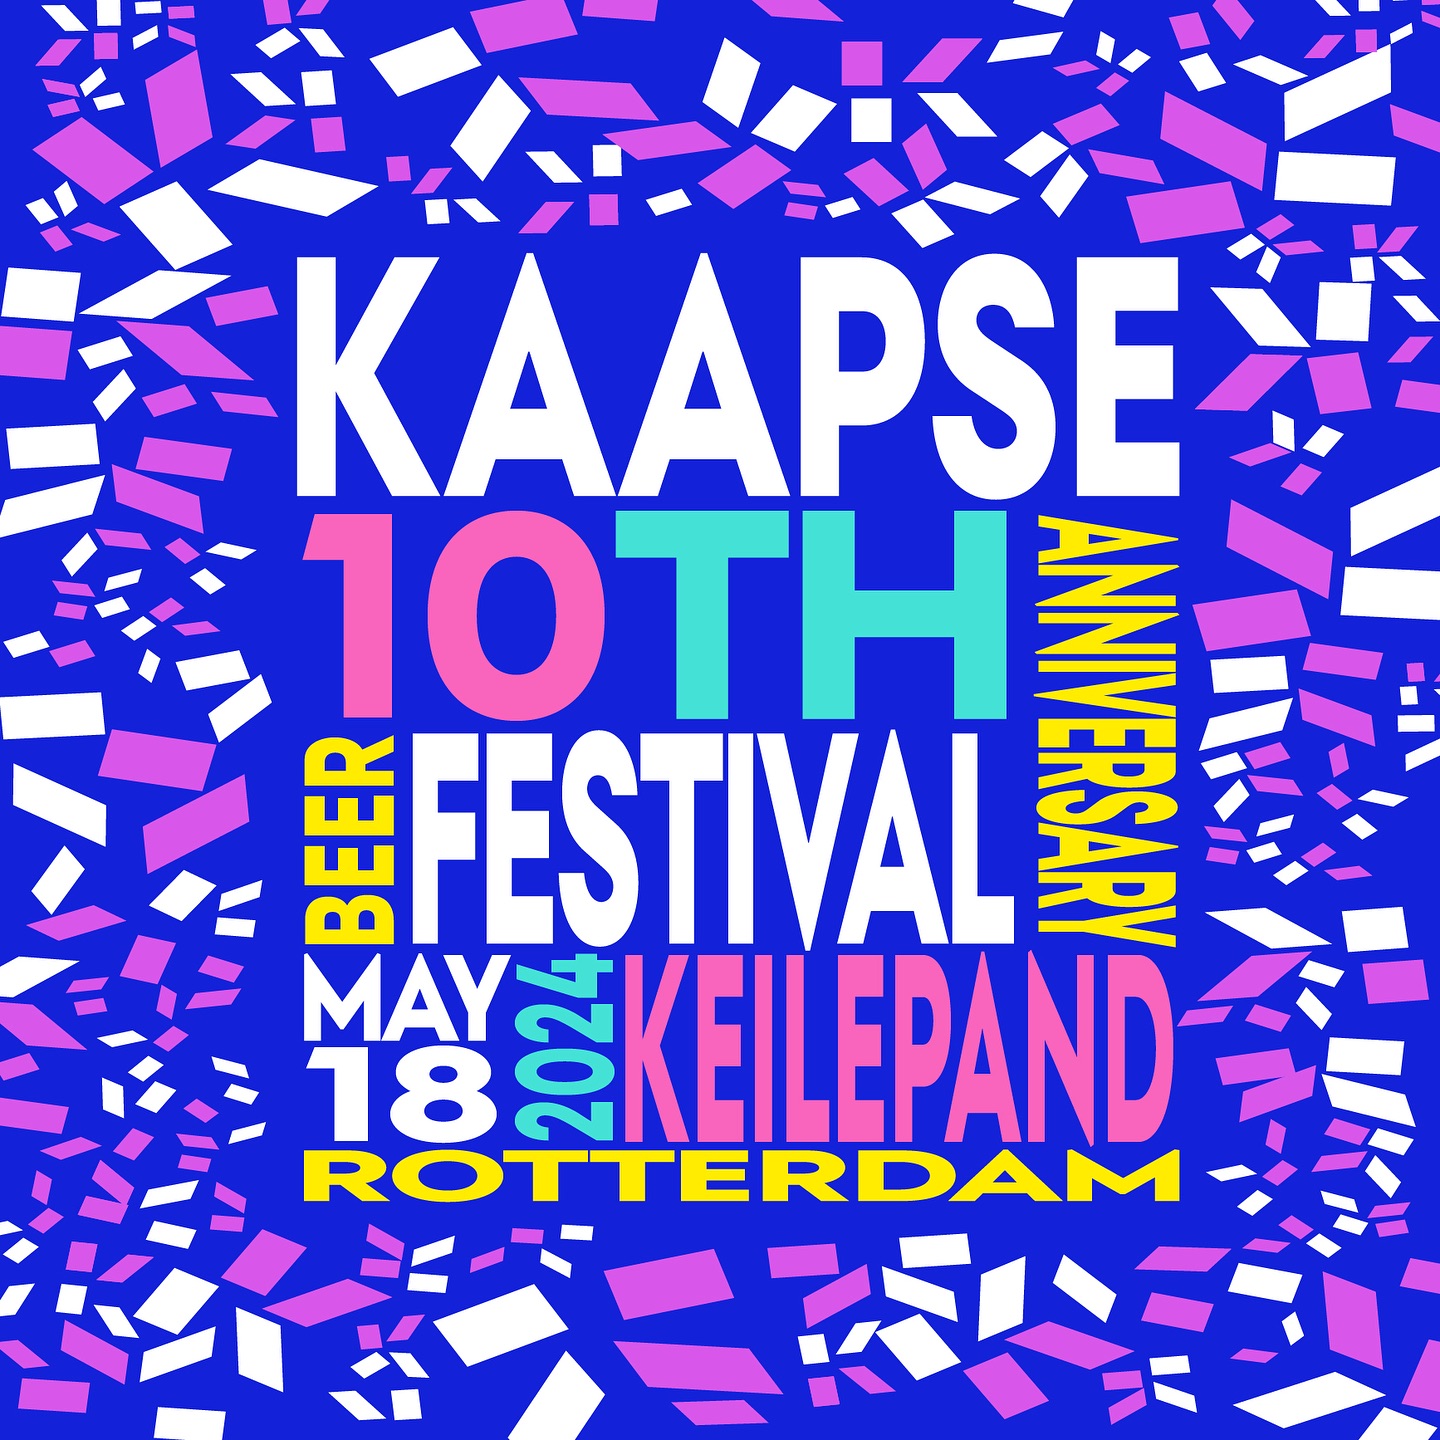 Kaapse 10th Anniversary Beer Festival